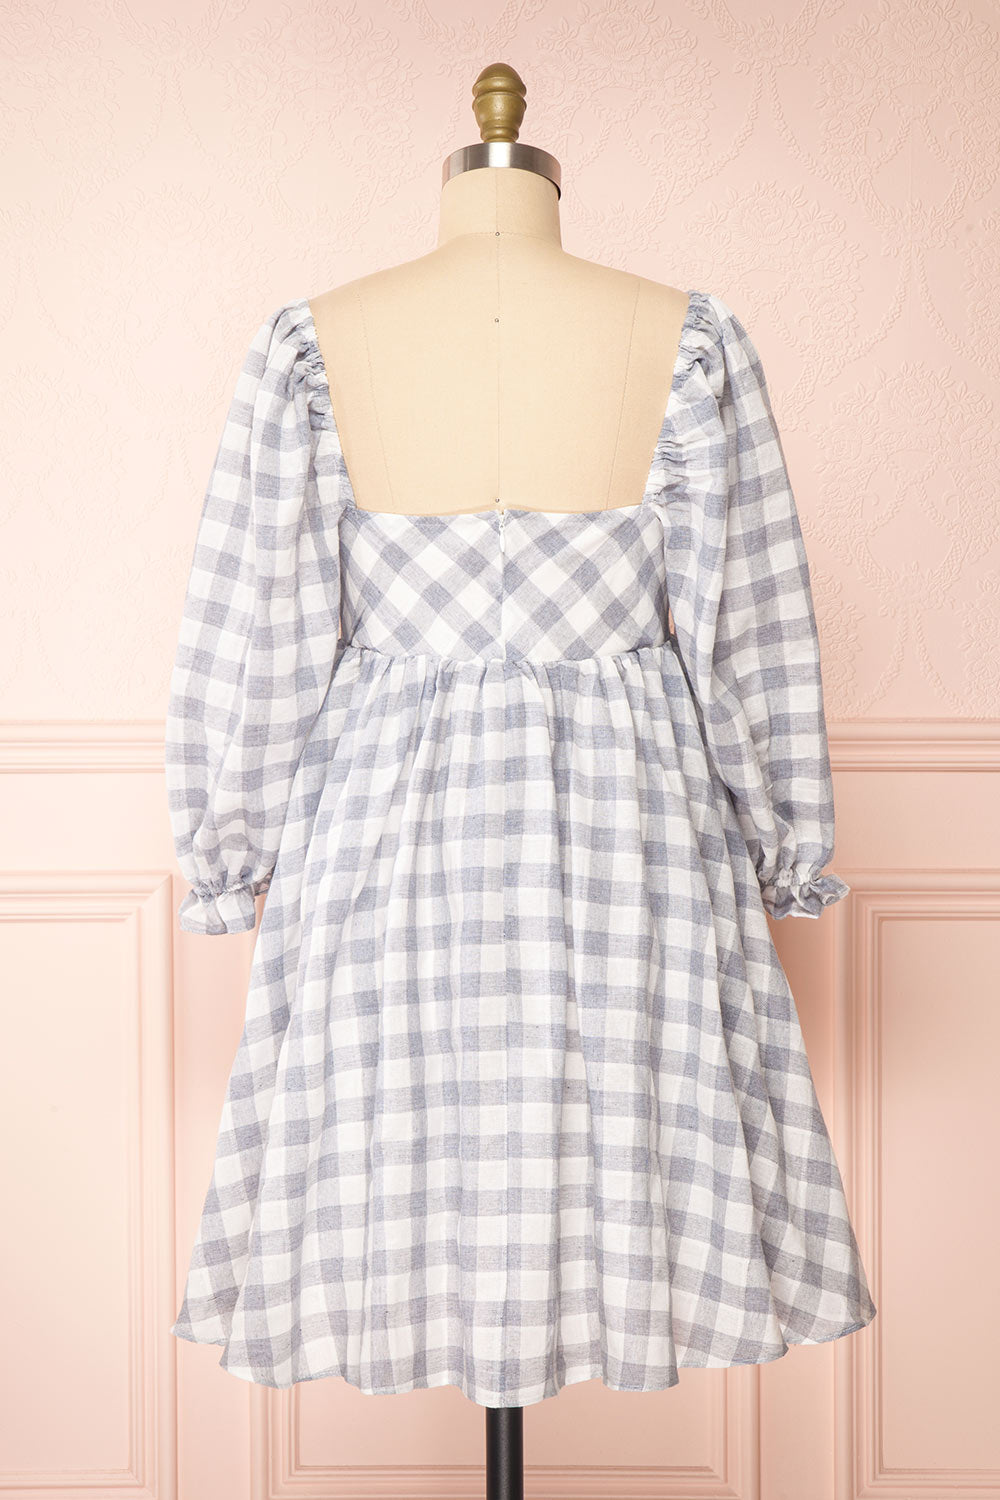 Conie Blue | Puffed Sleeves Short Checkered Dress back view 